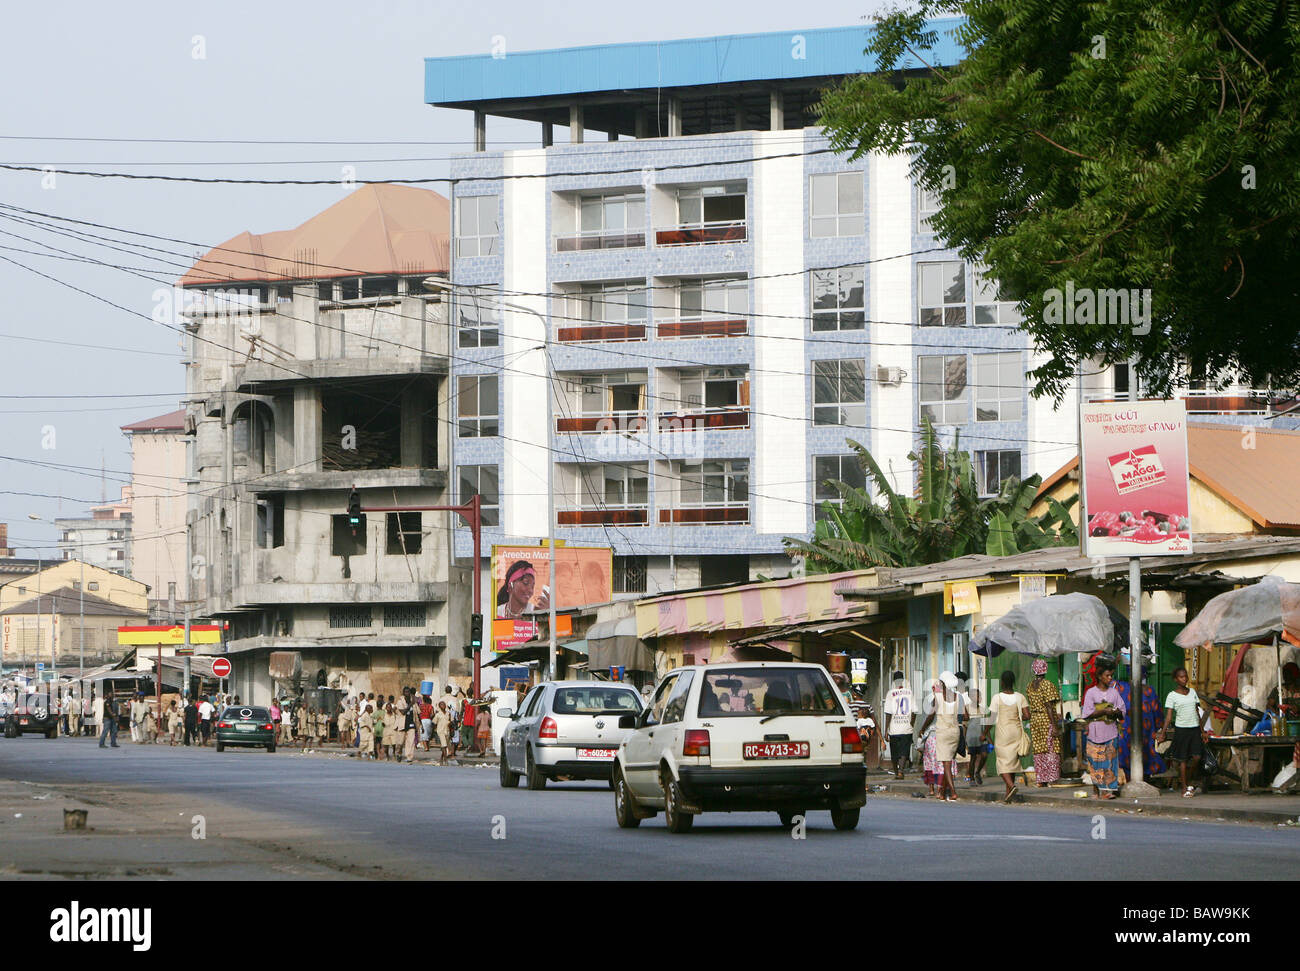 Conakry, Guinea: City of the capital Conakry Stock Photo